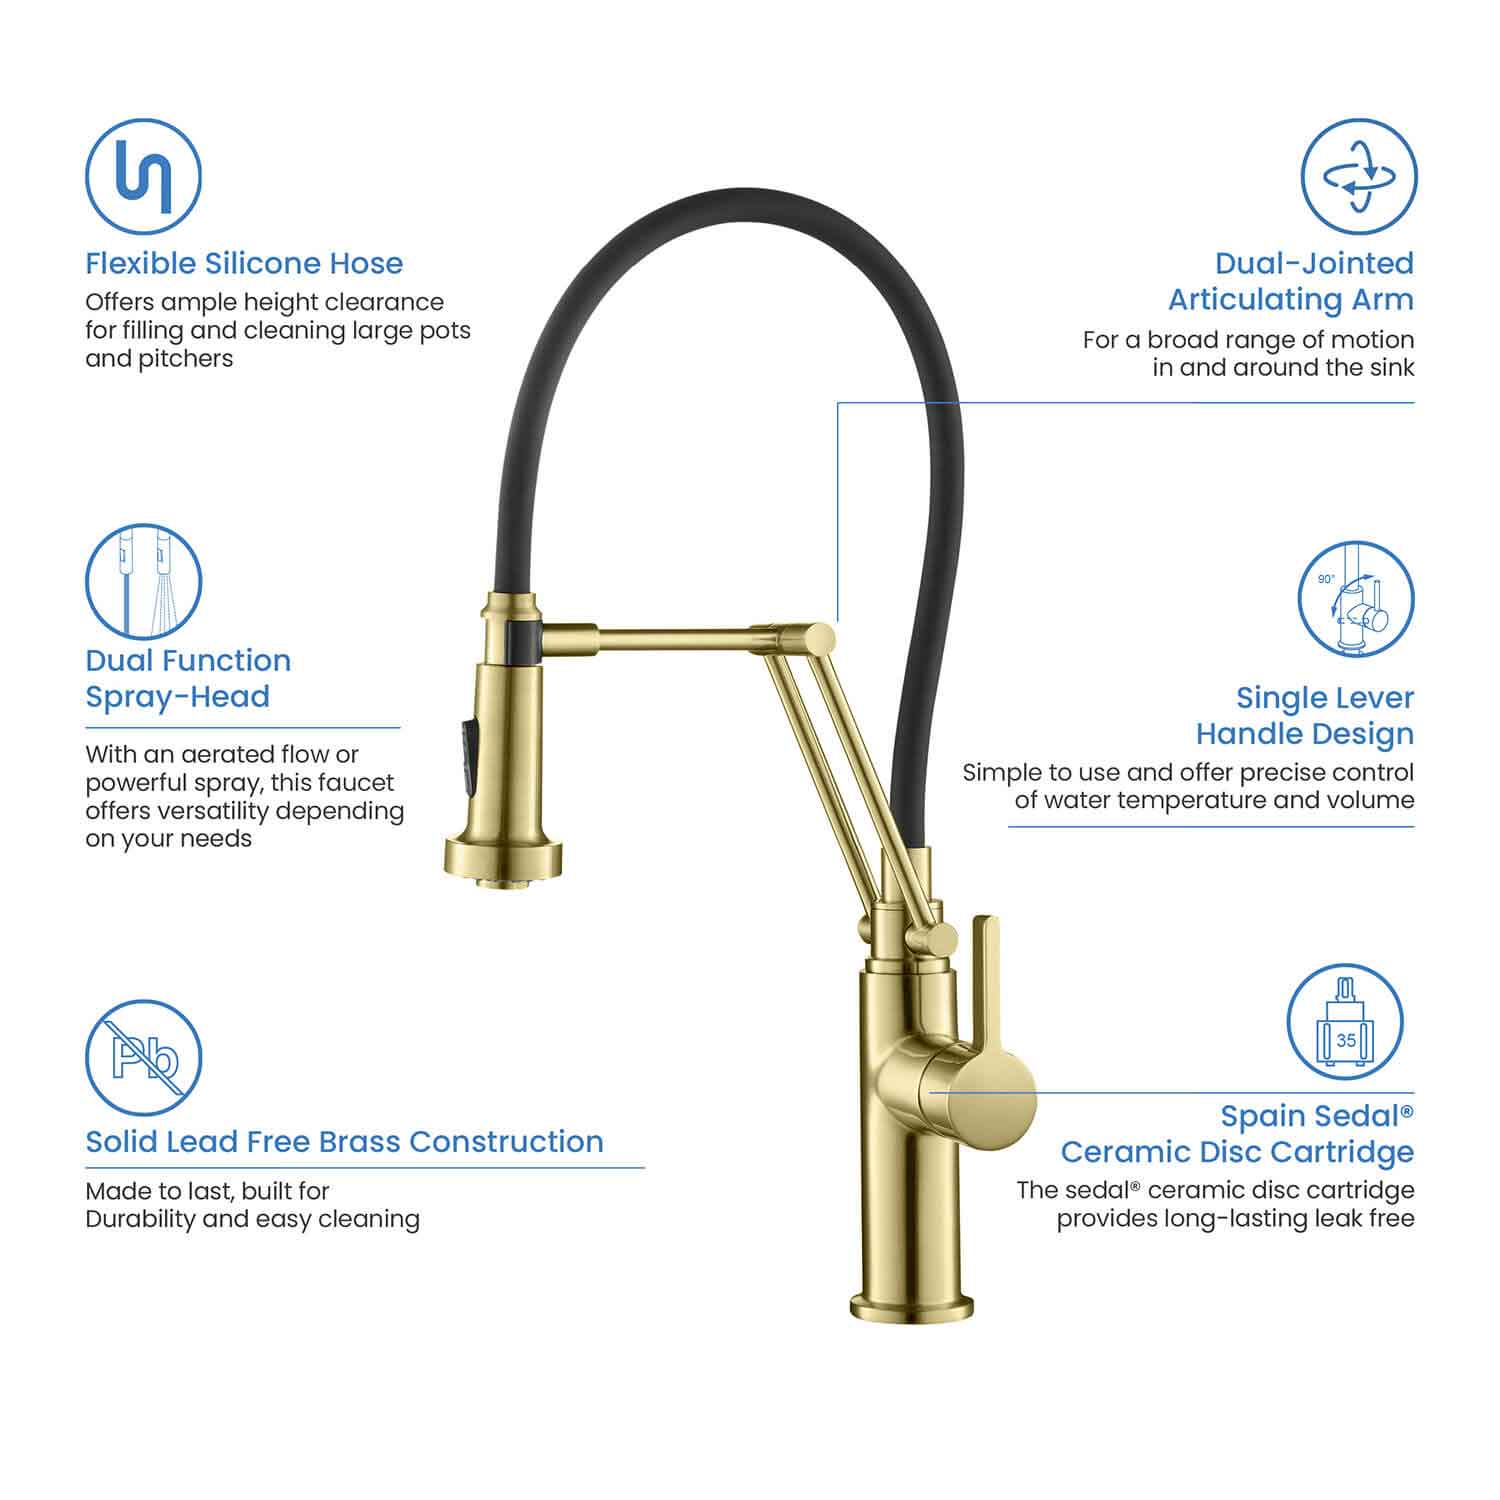 Kibi Engel Single Handle Pull Down Kitchen Faucet In Brushed Gold Finish